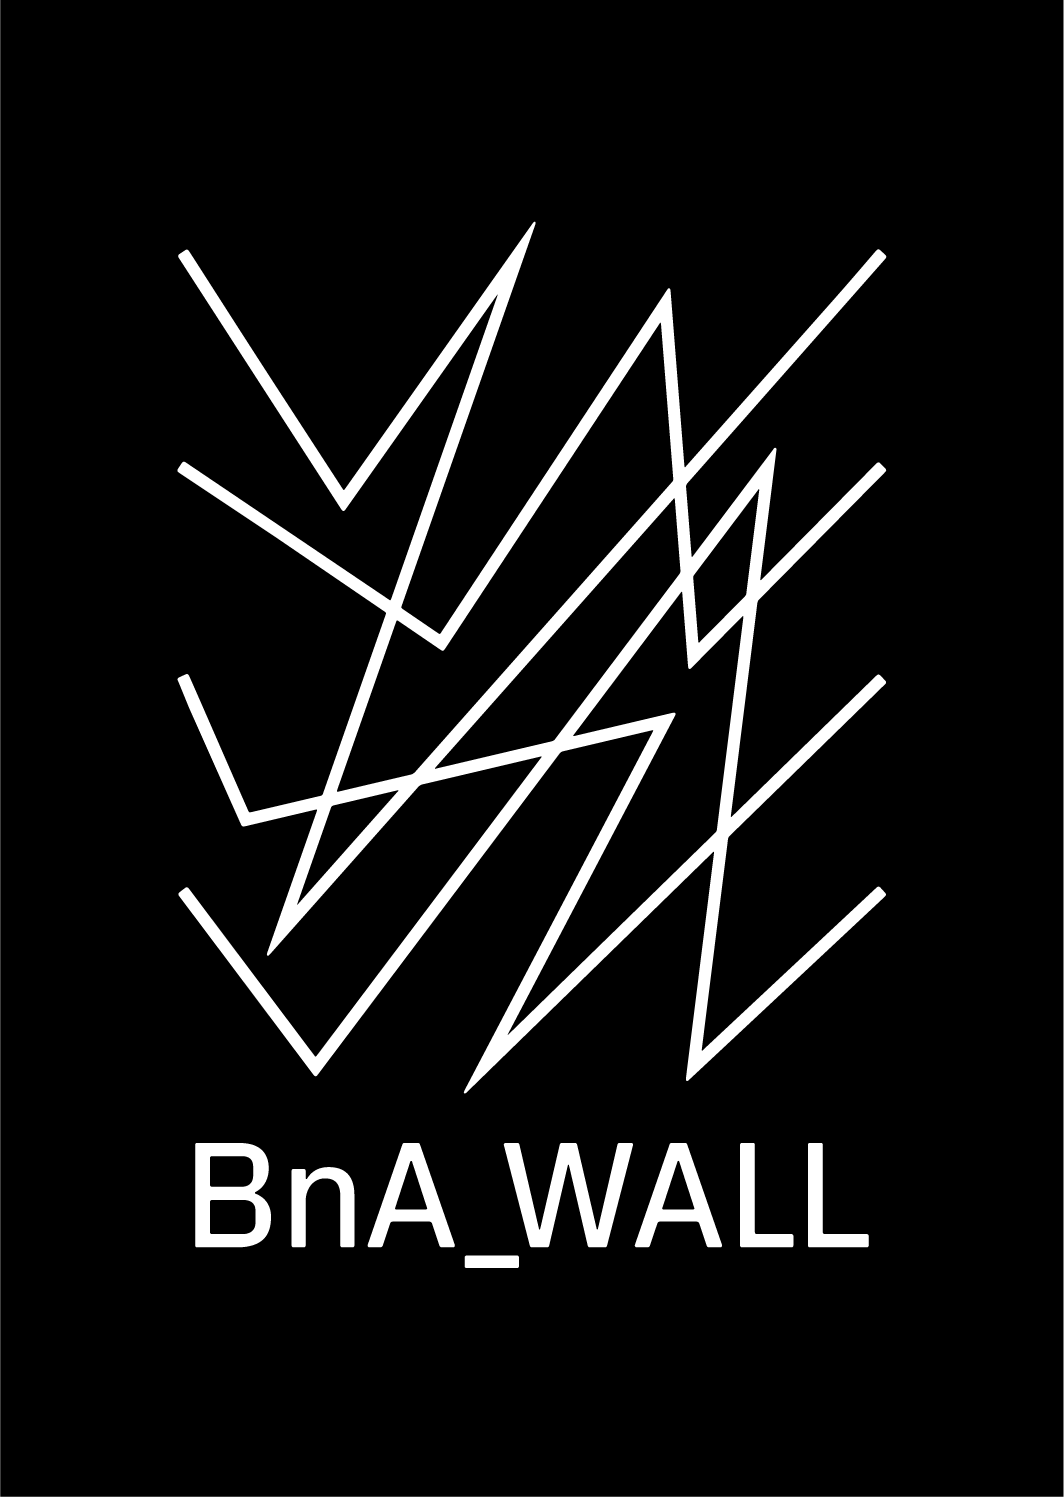 BnA_WALL ART Collection 